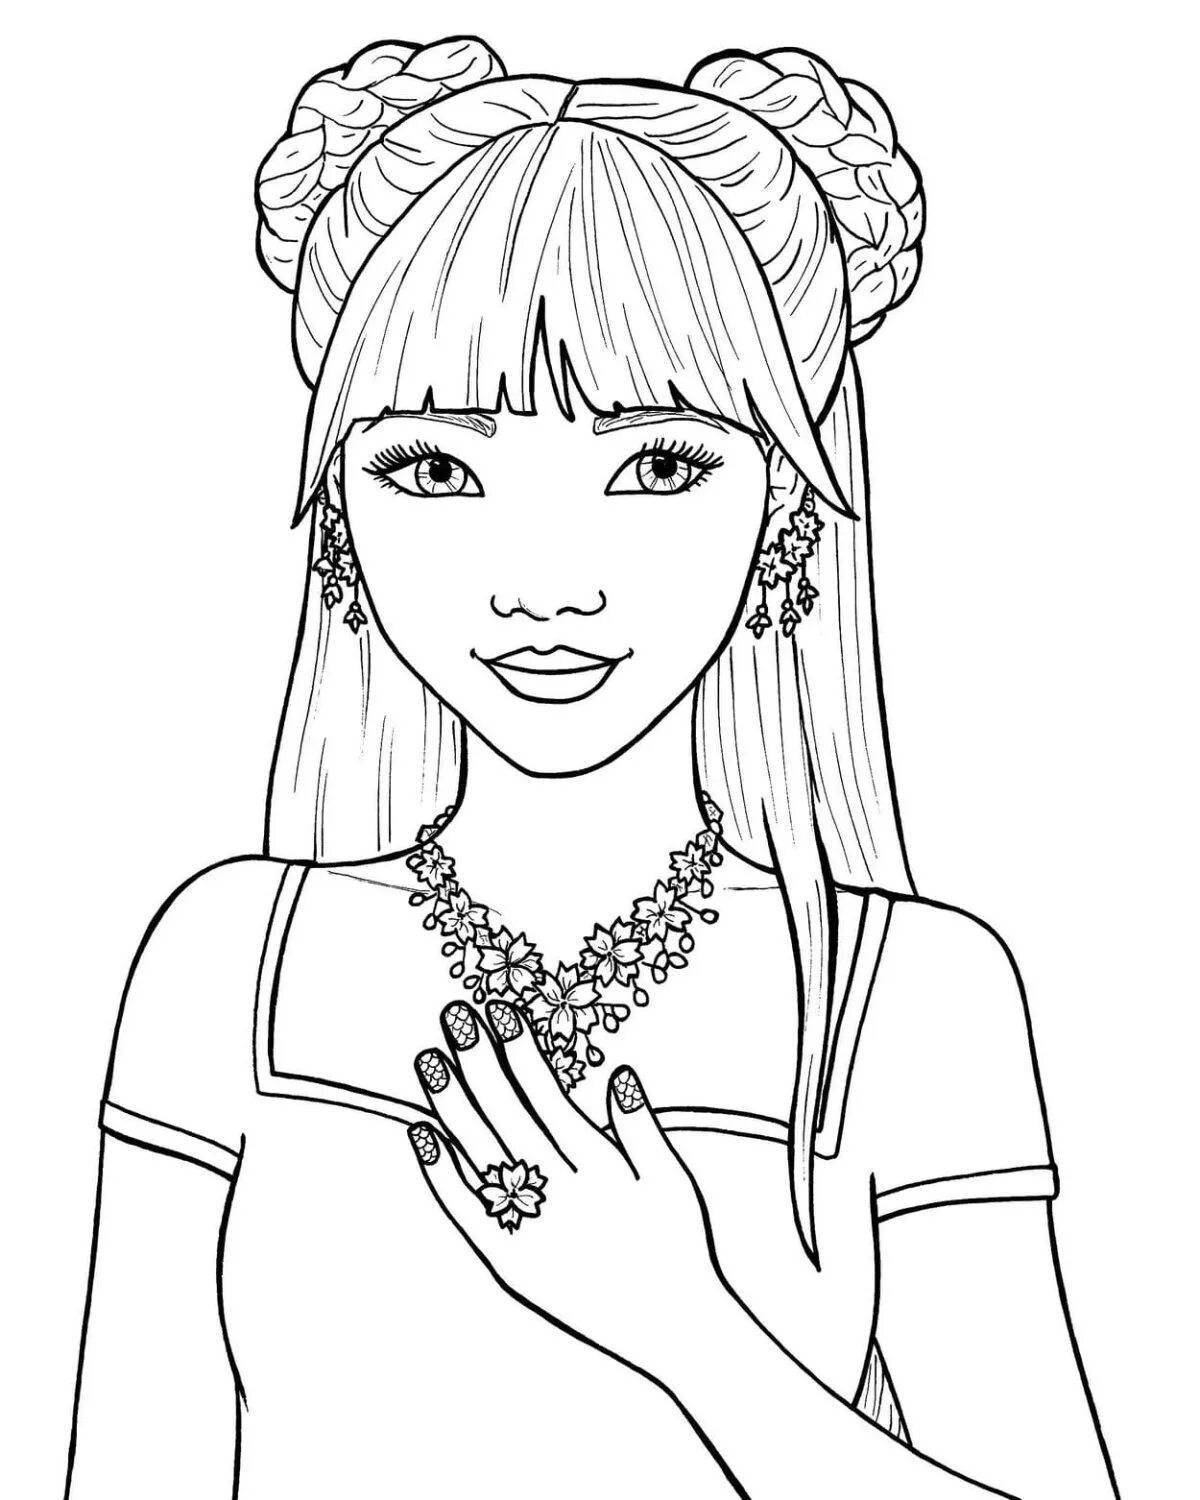 Sparkly coloring page from photo